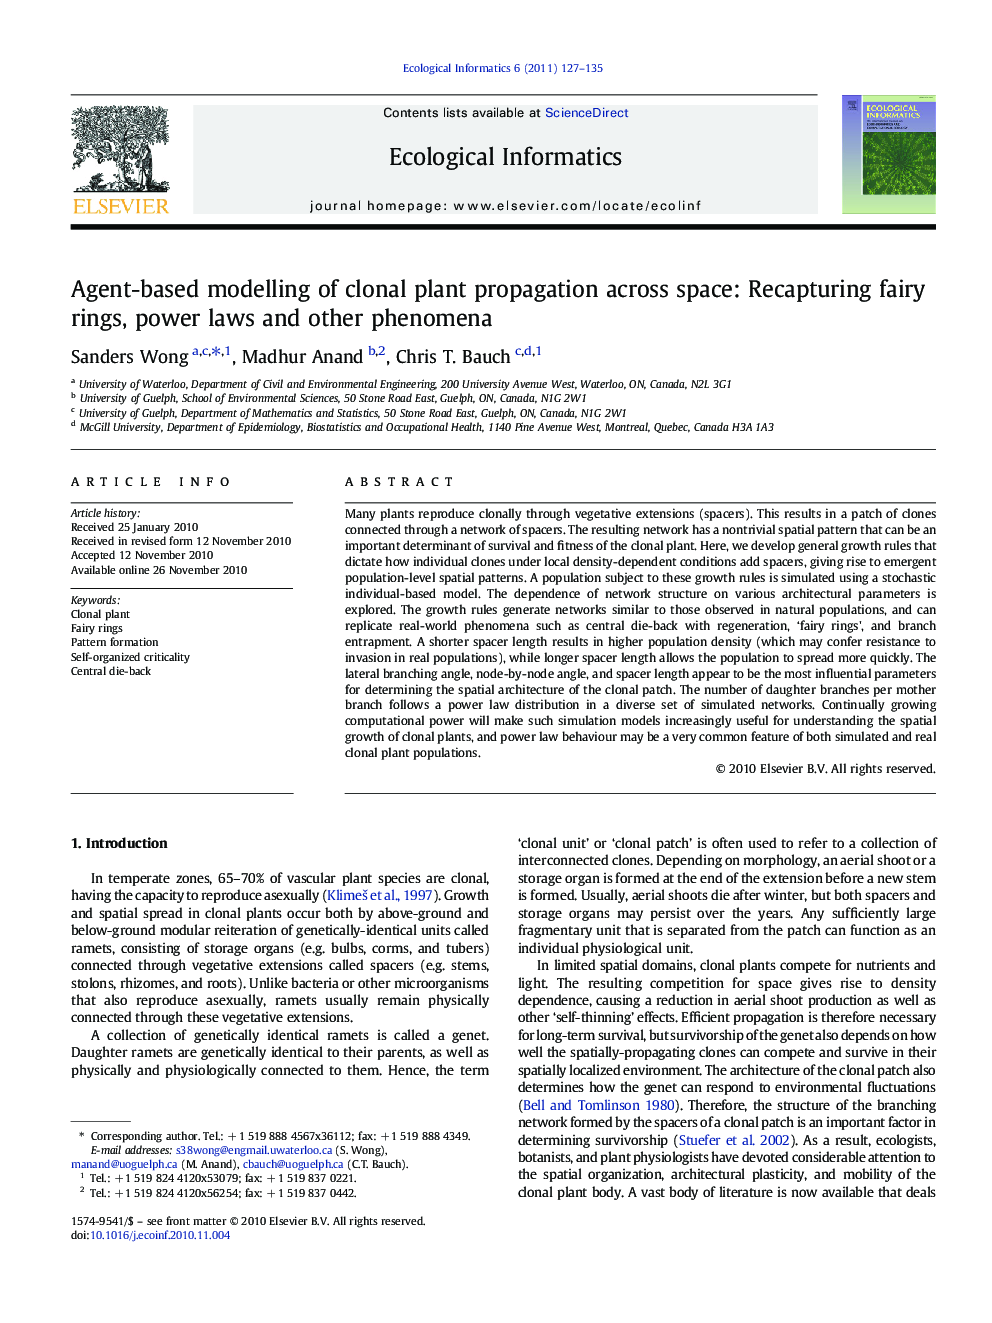 Agent-based modelling of clonal plant propagation across space: Recapturing fairy rings, power laws and other phenomena